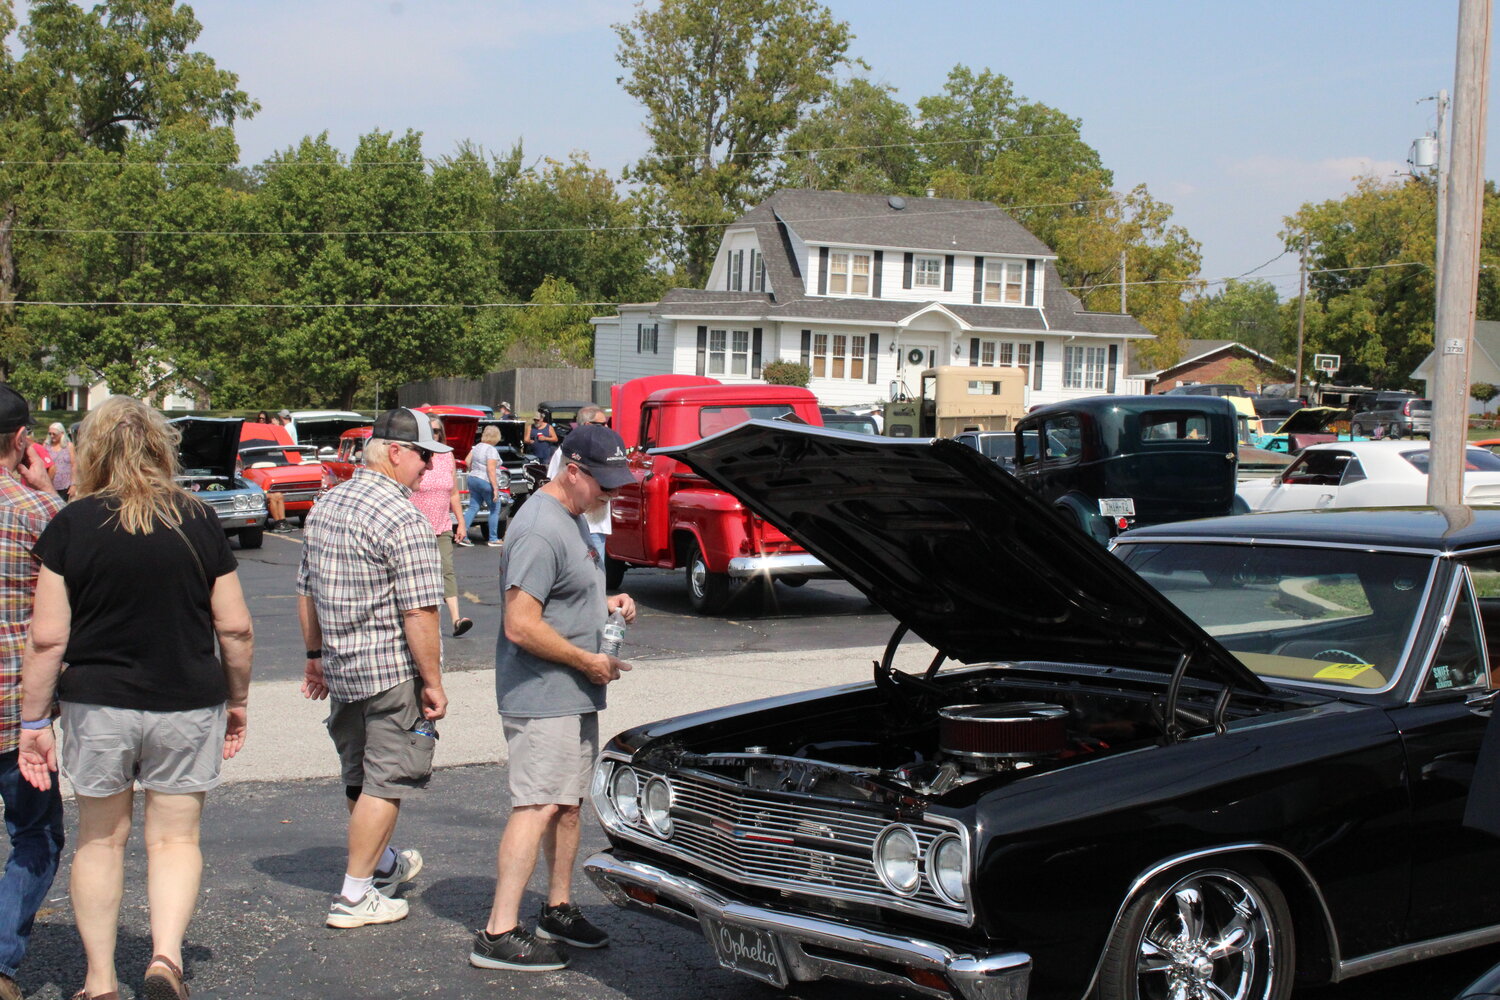 A man checks out one of the many cars on display at the car show.